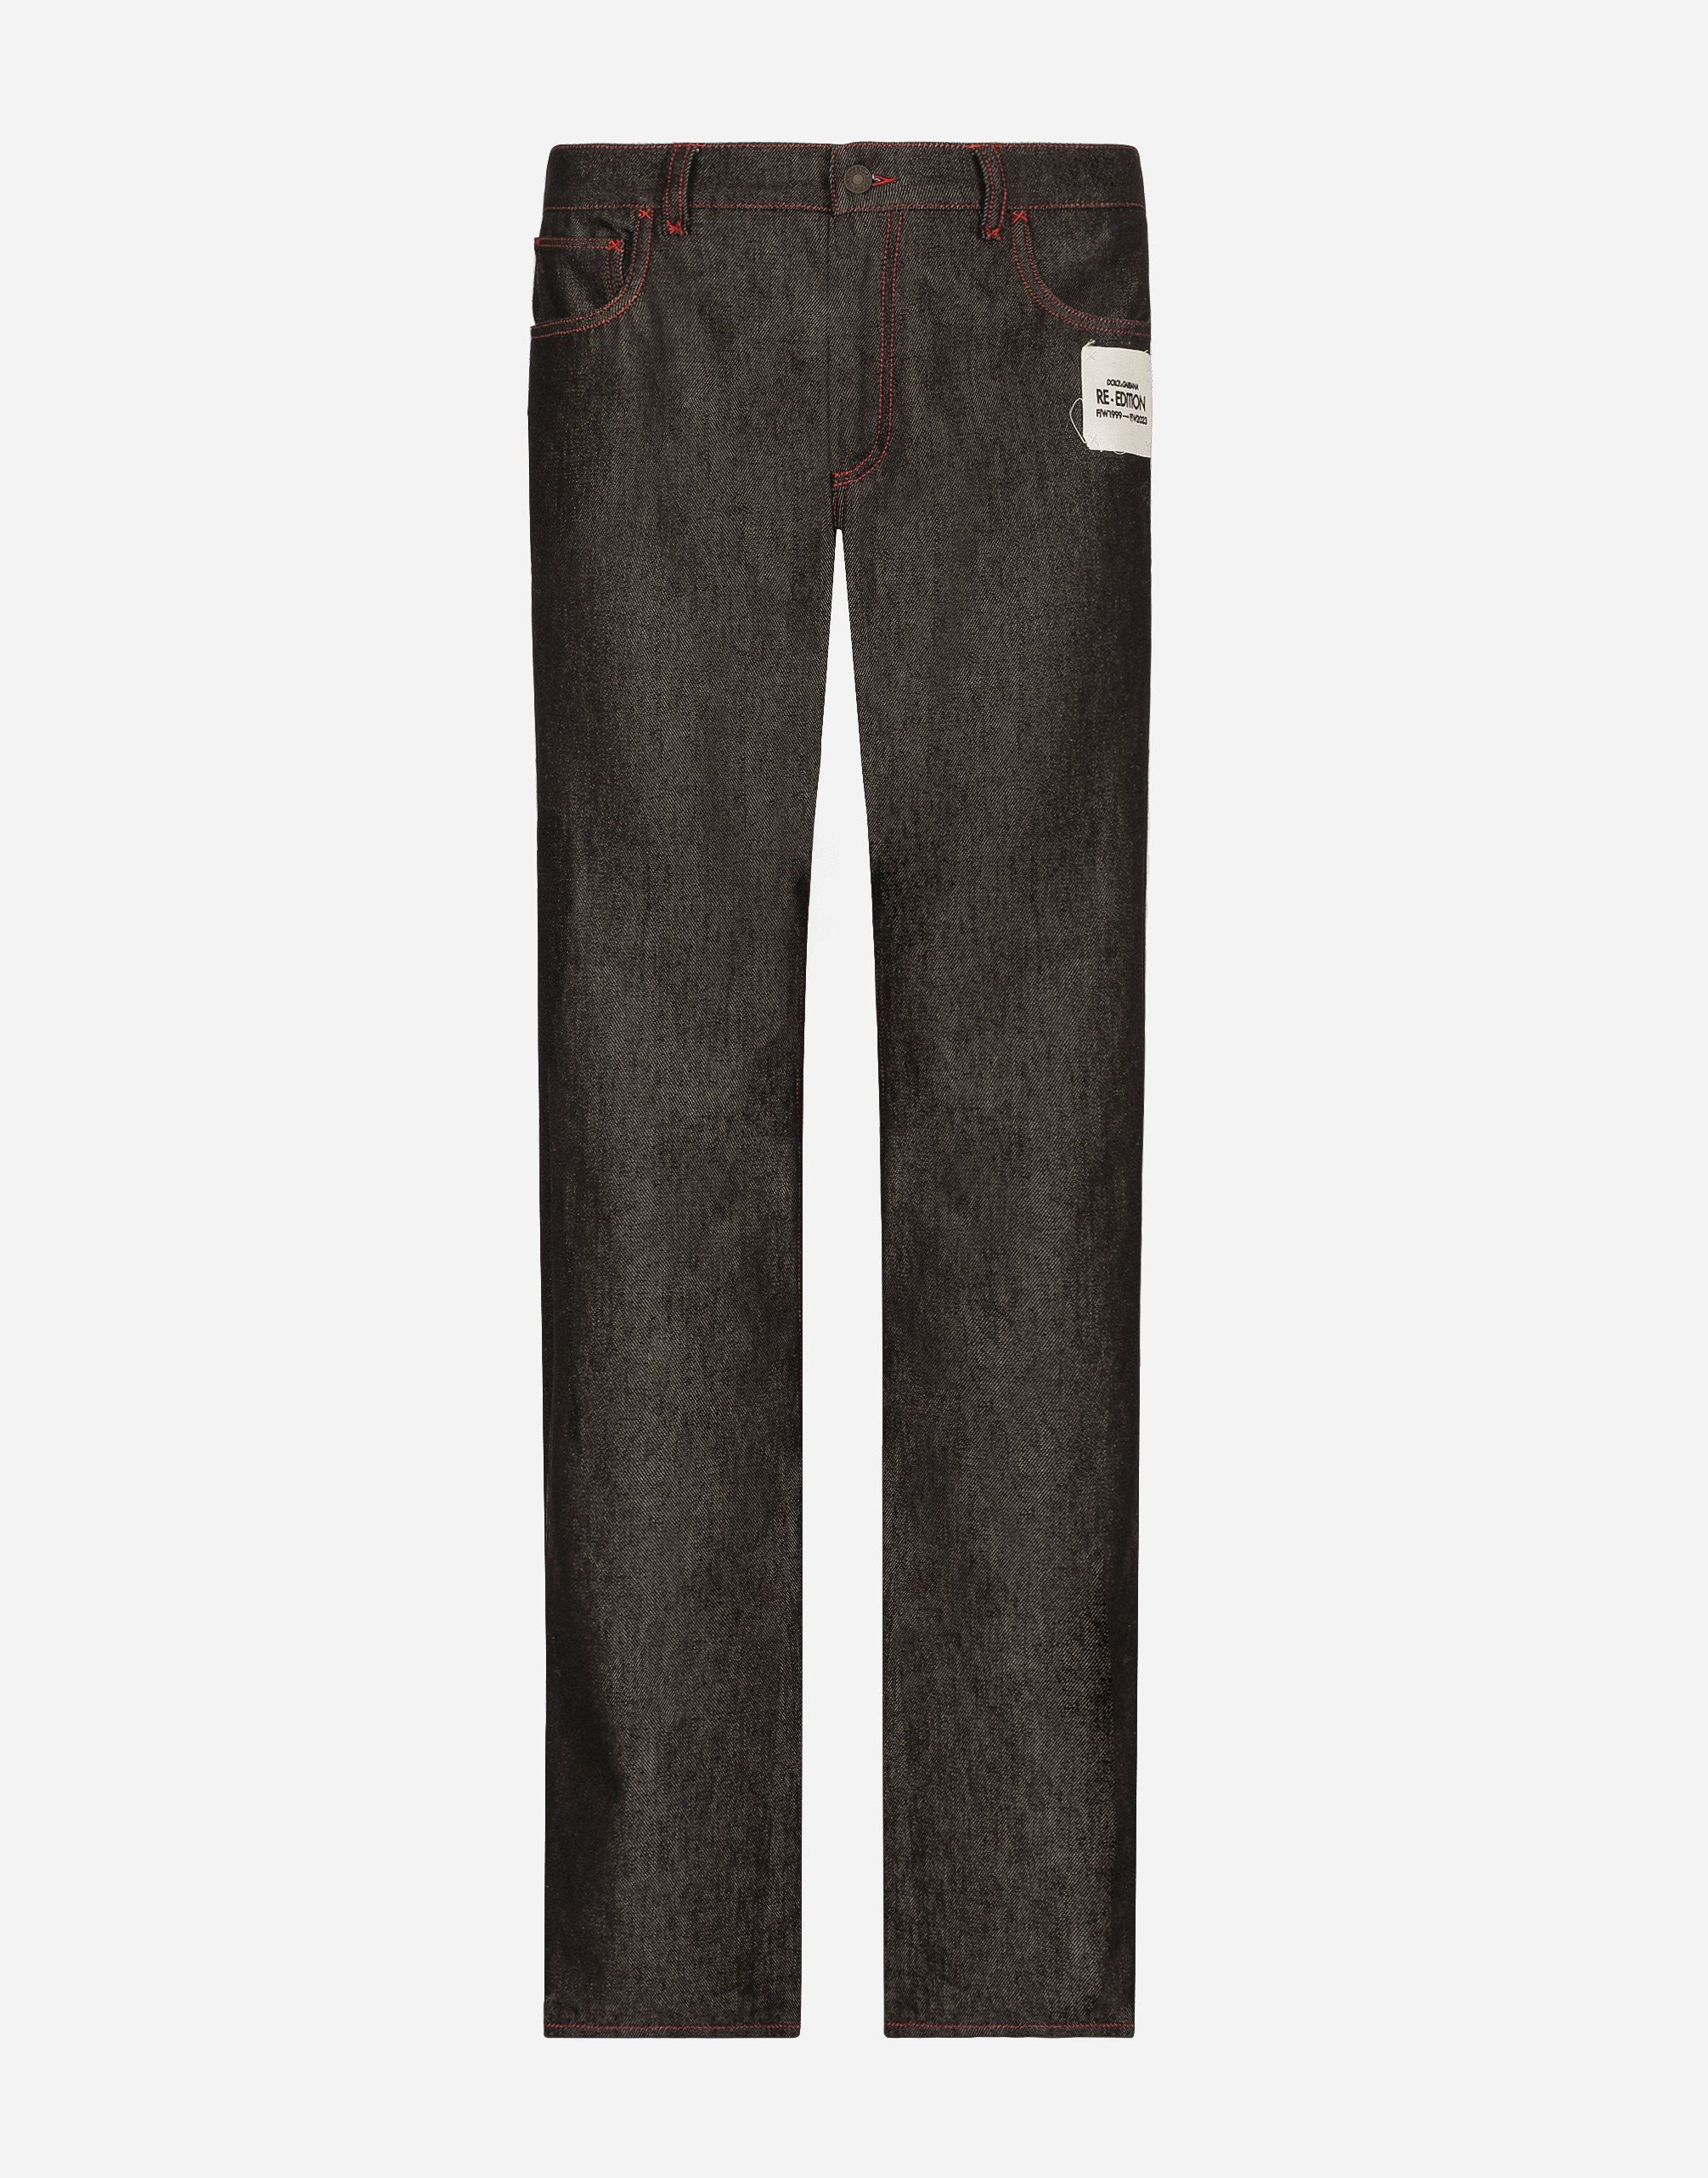 Double-face denim and flannel pants